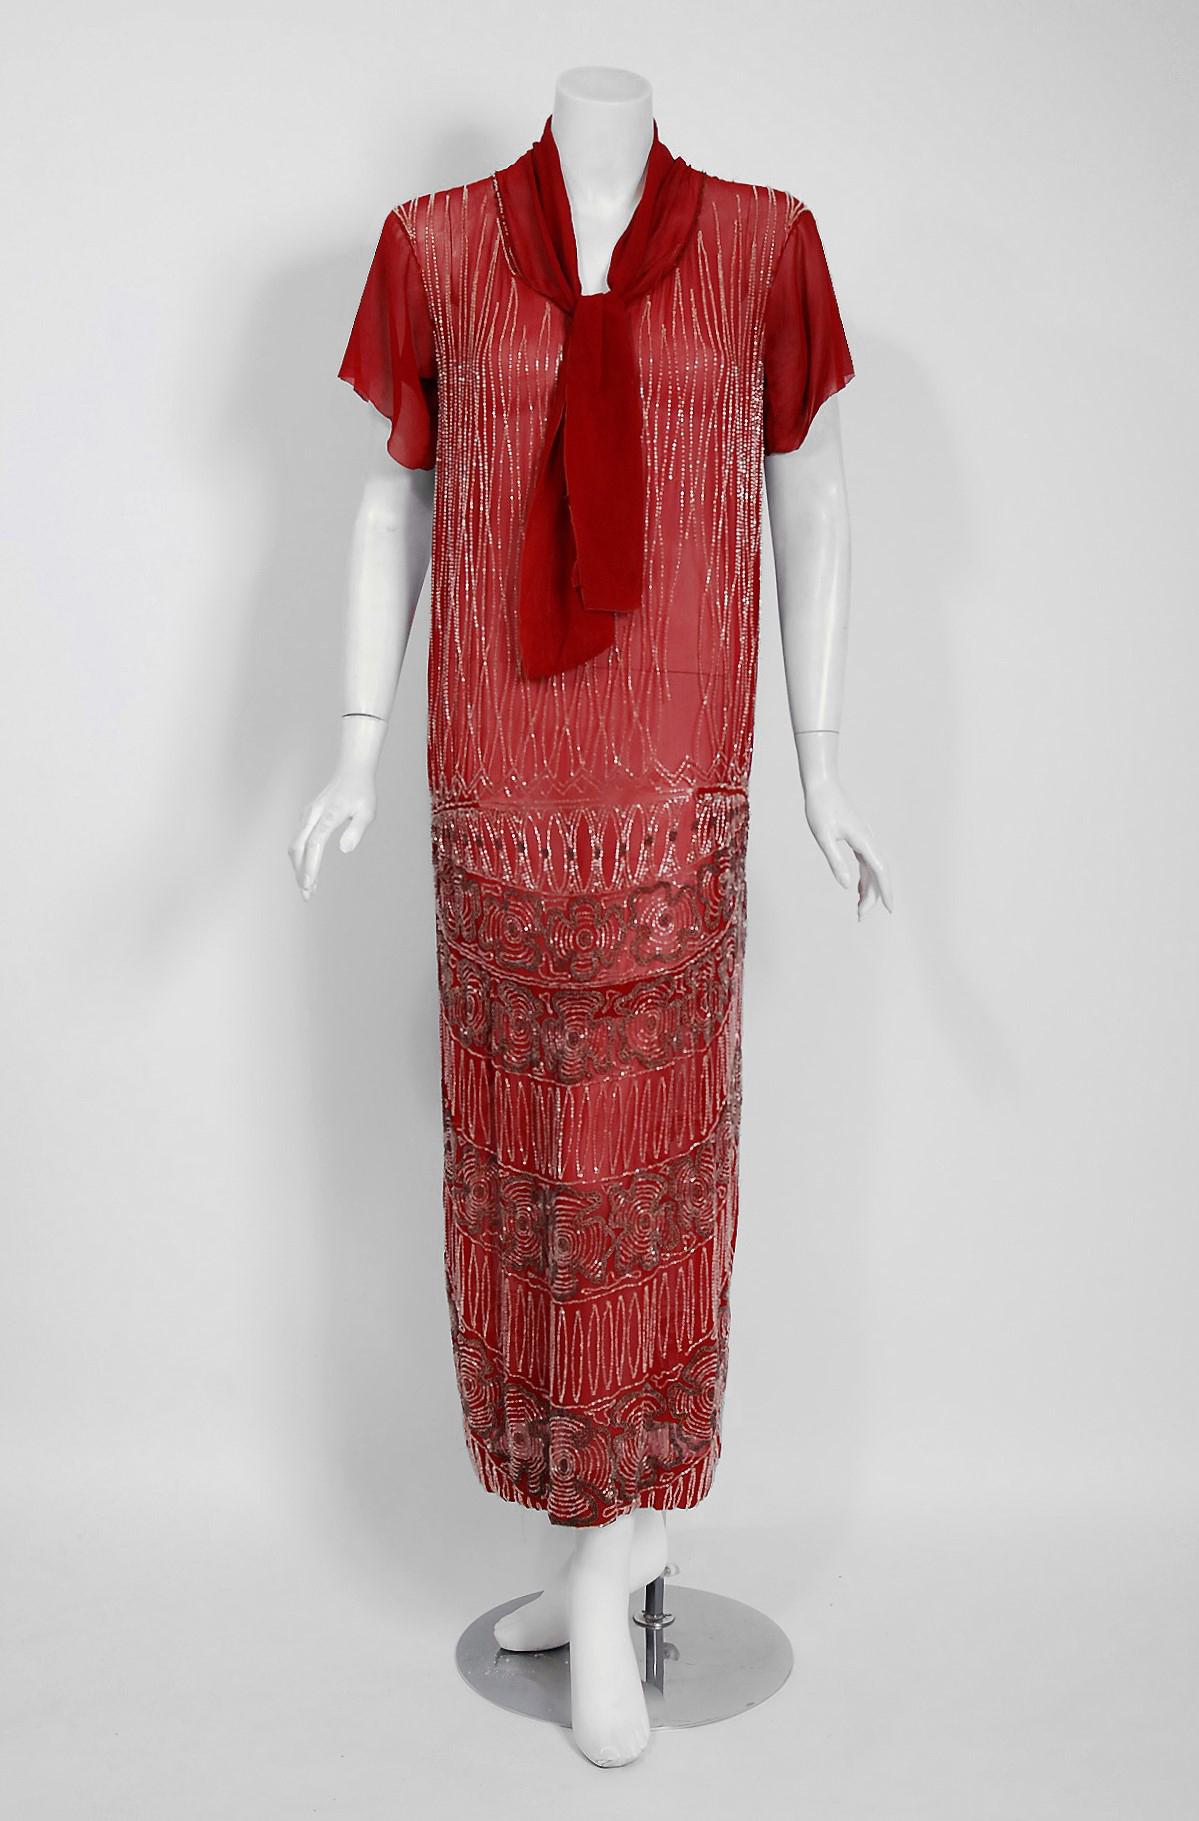 Vibrant flapper dresses from the early 20th century are perennial favorites and this one is a show-stopper! The garment's simple unstructured style is so modern; the fine deco floral beadwork is a treasure trove of needle art. This beauty, fashioned